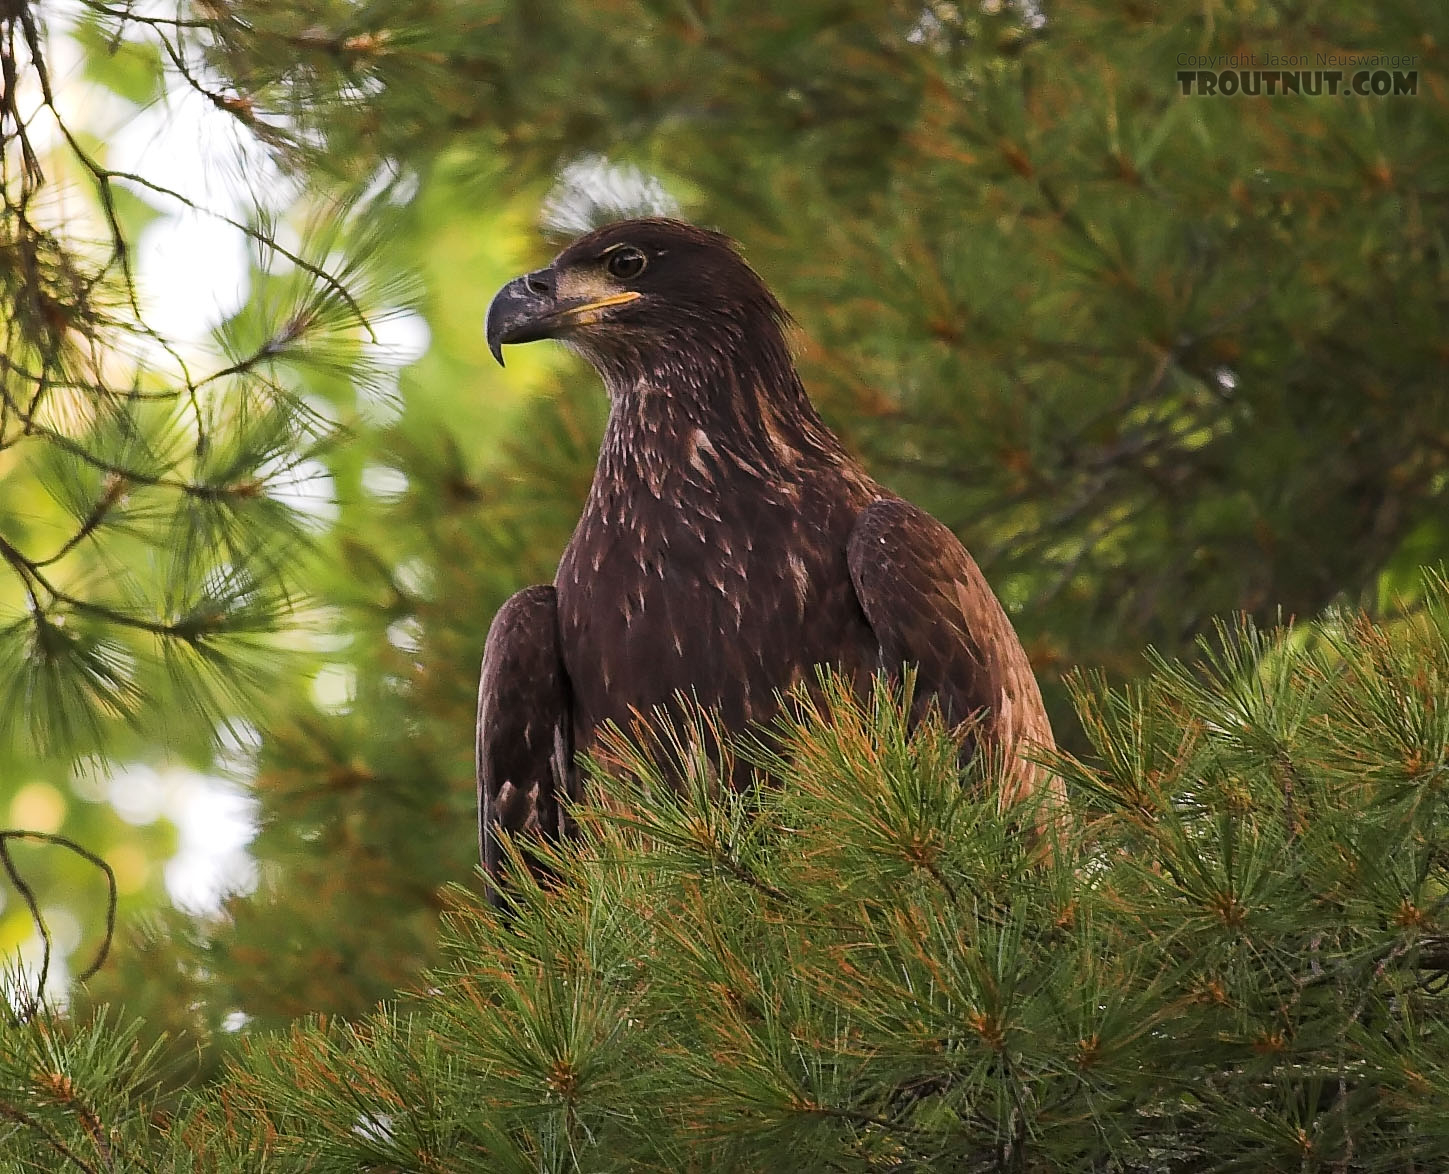 My dad held the canoe in place while I snapped a picture of this immature bald eagle perched in a pine over the river on an August evening.  It probably caught more fish than we did. From the Namekagon River in Wisconsin.